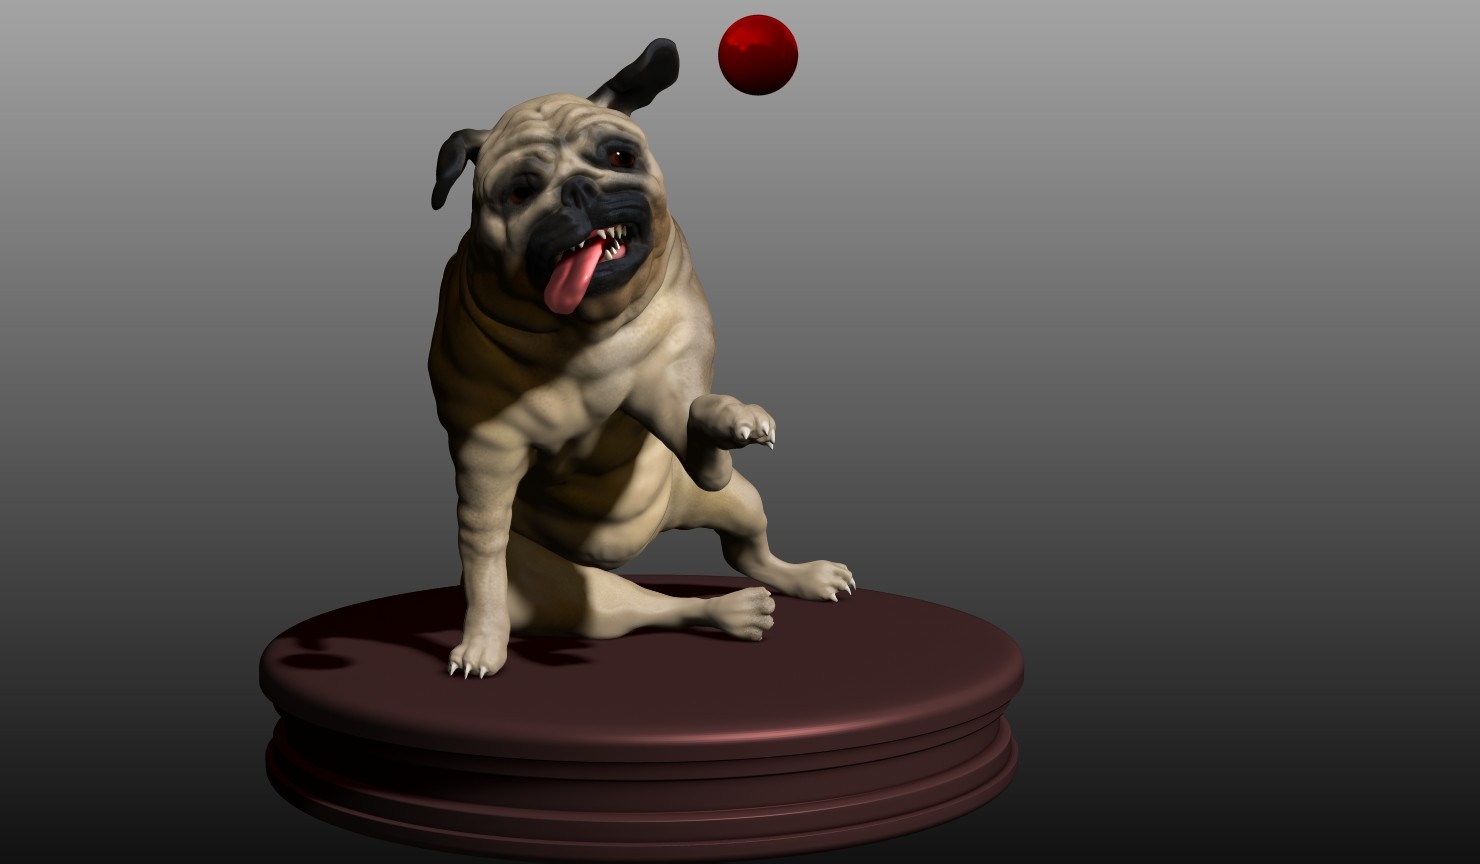 Participated in a speedsculpt competition. The task was to sculpt a dog. This is my entry.